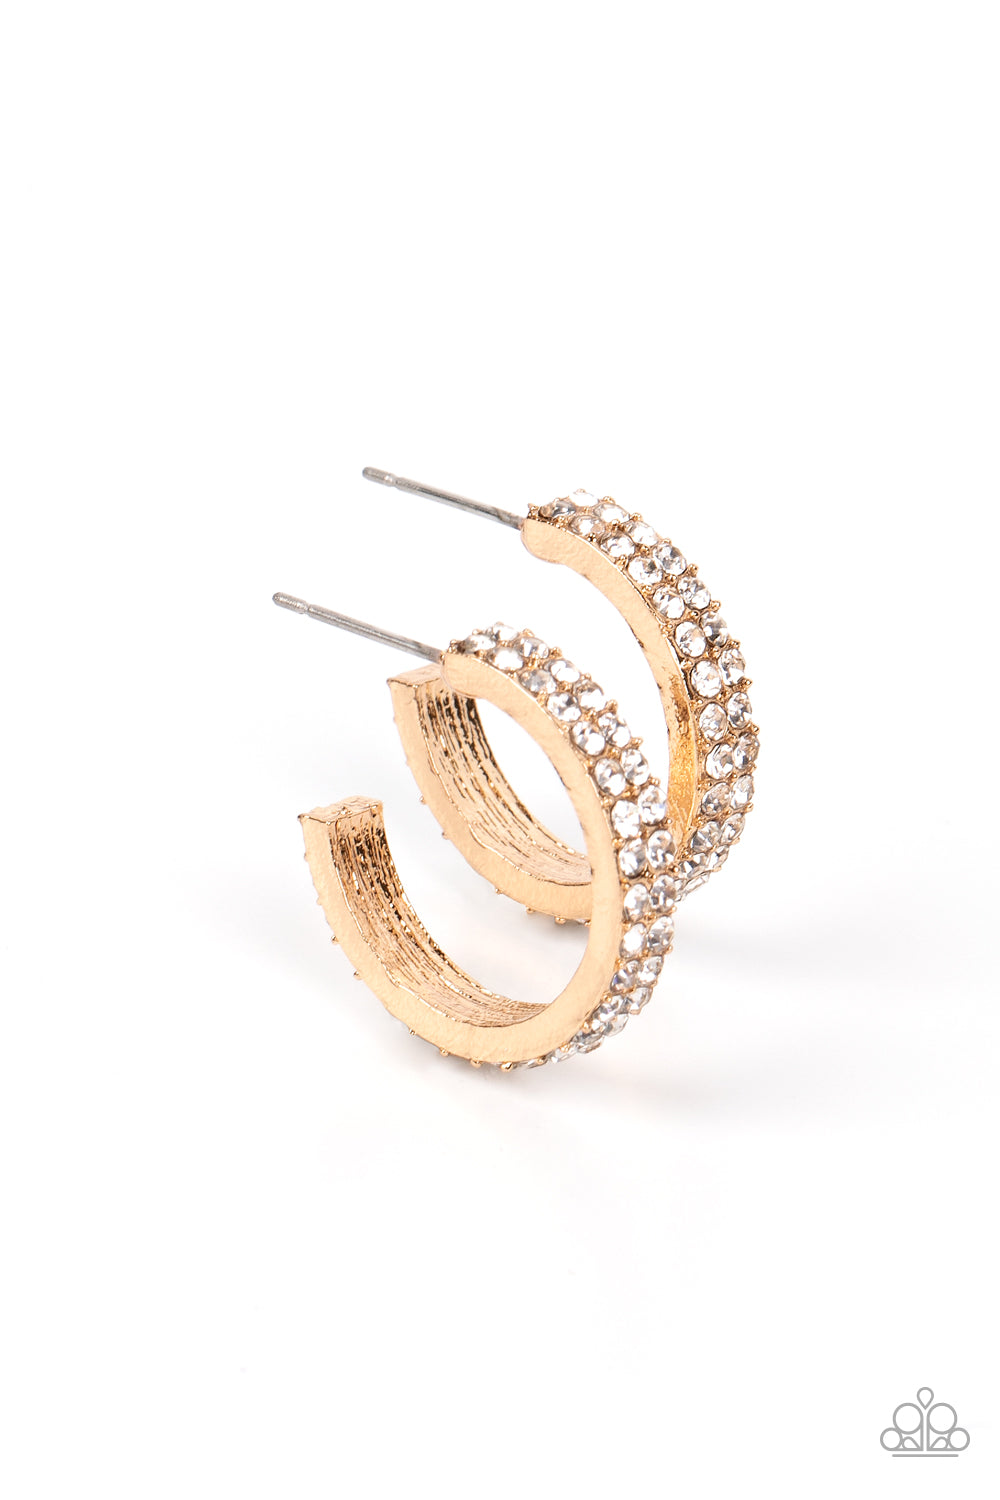 Positively Petite - gold - Paparazzi earrings